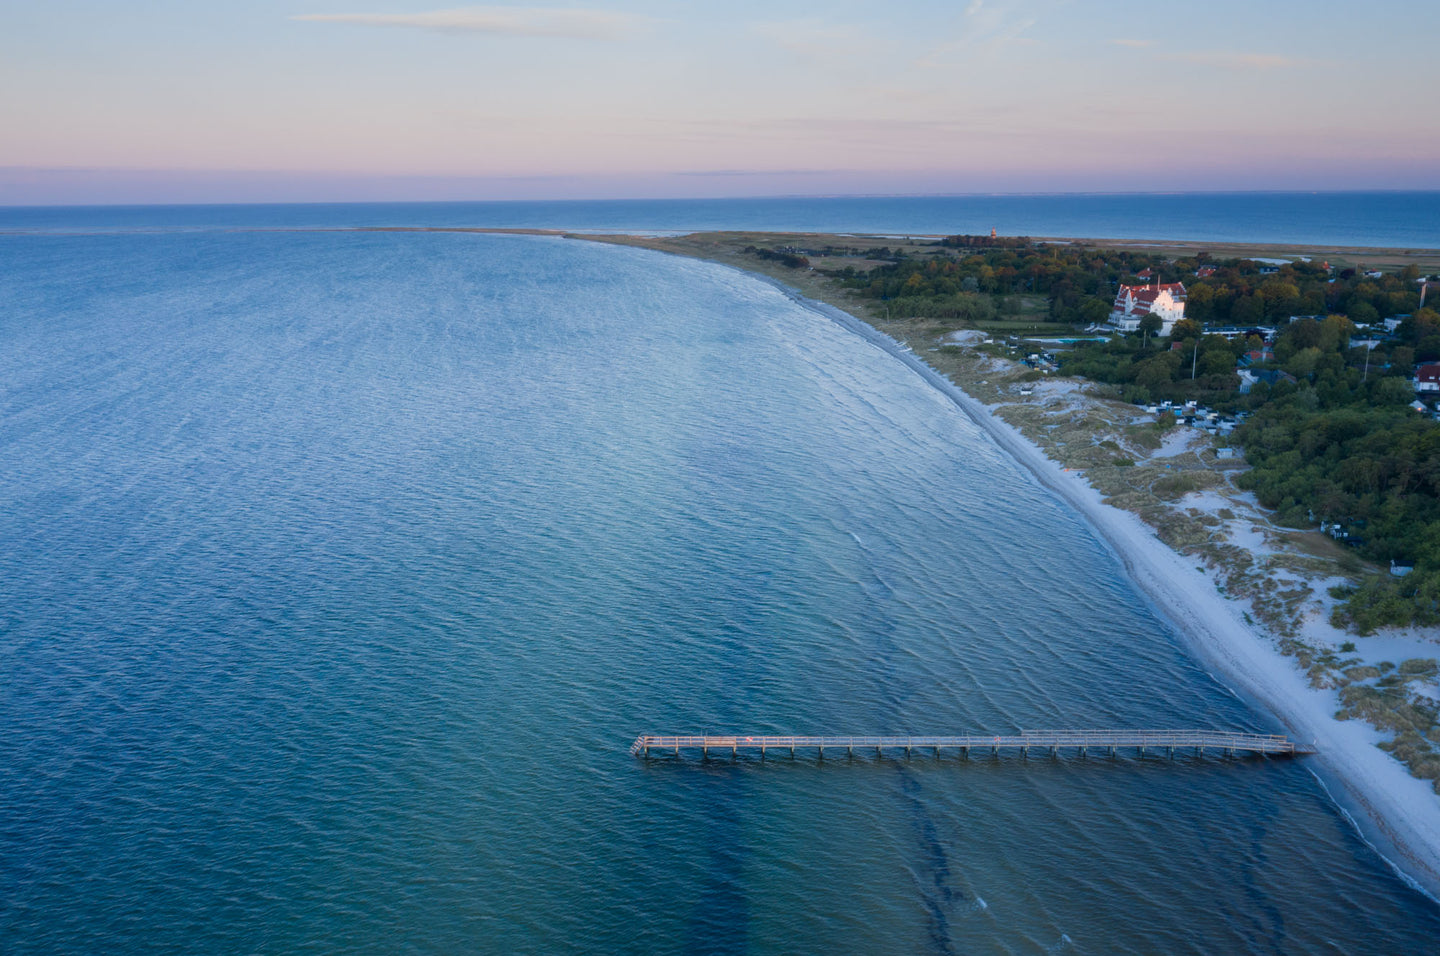 The pier of Falsterbo